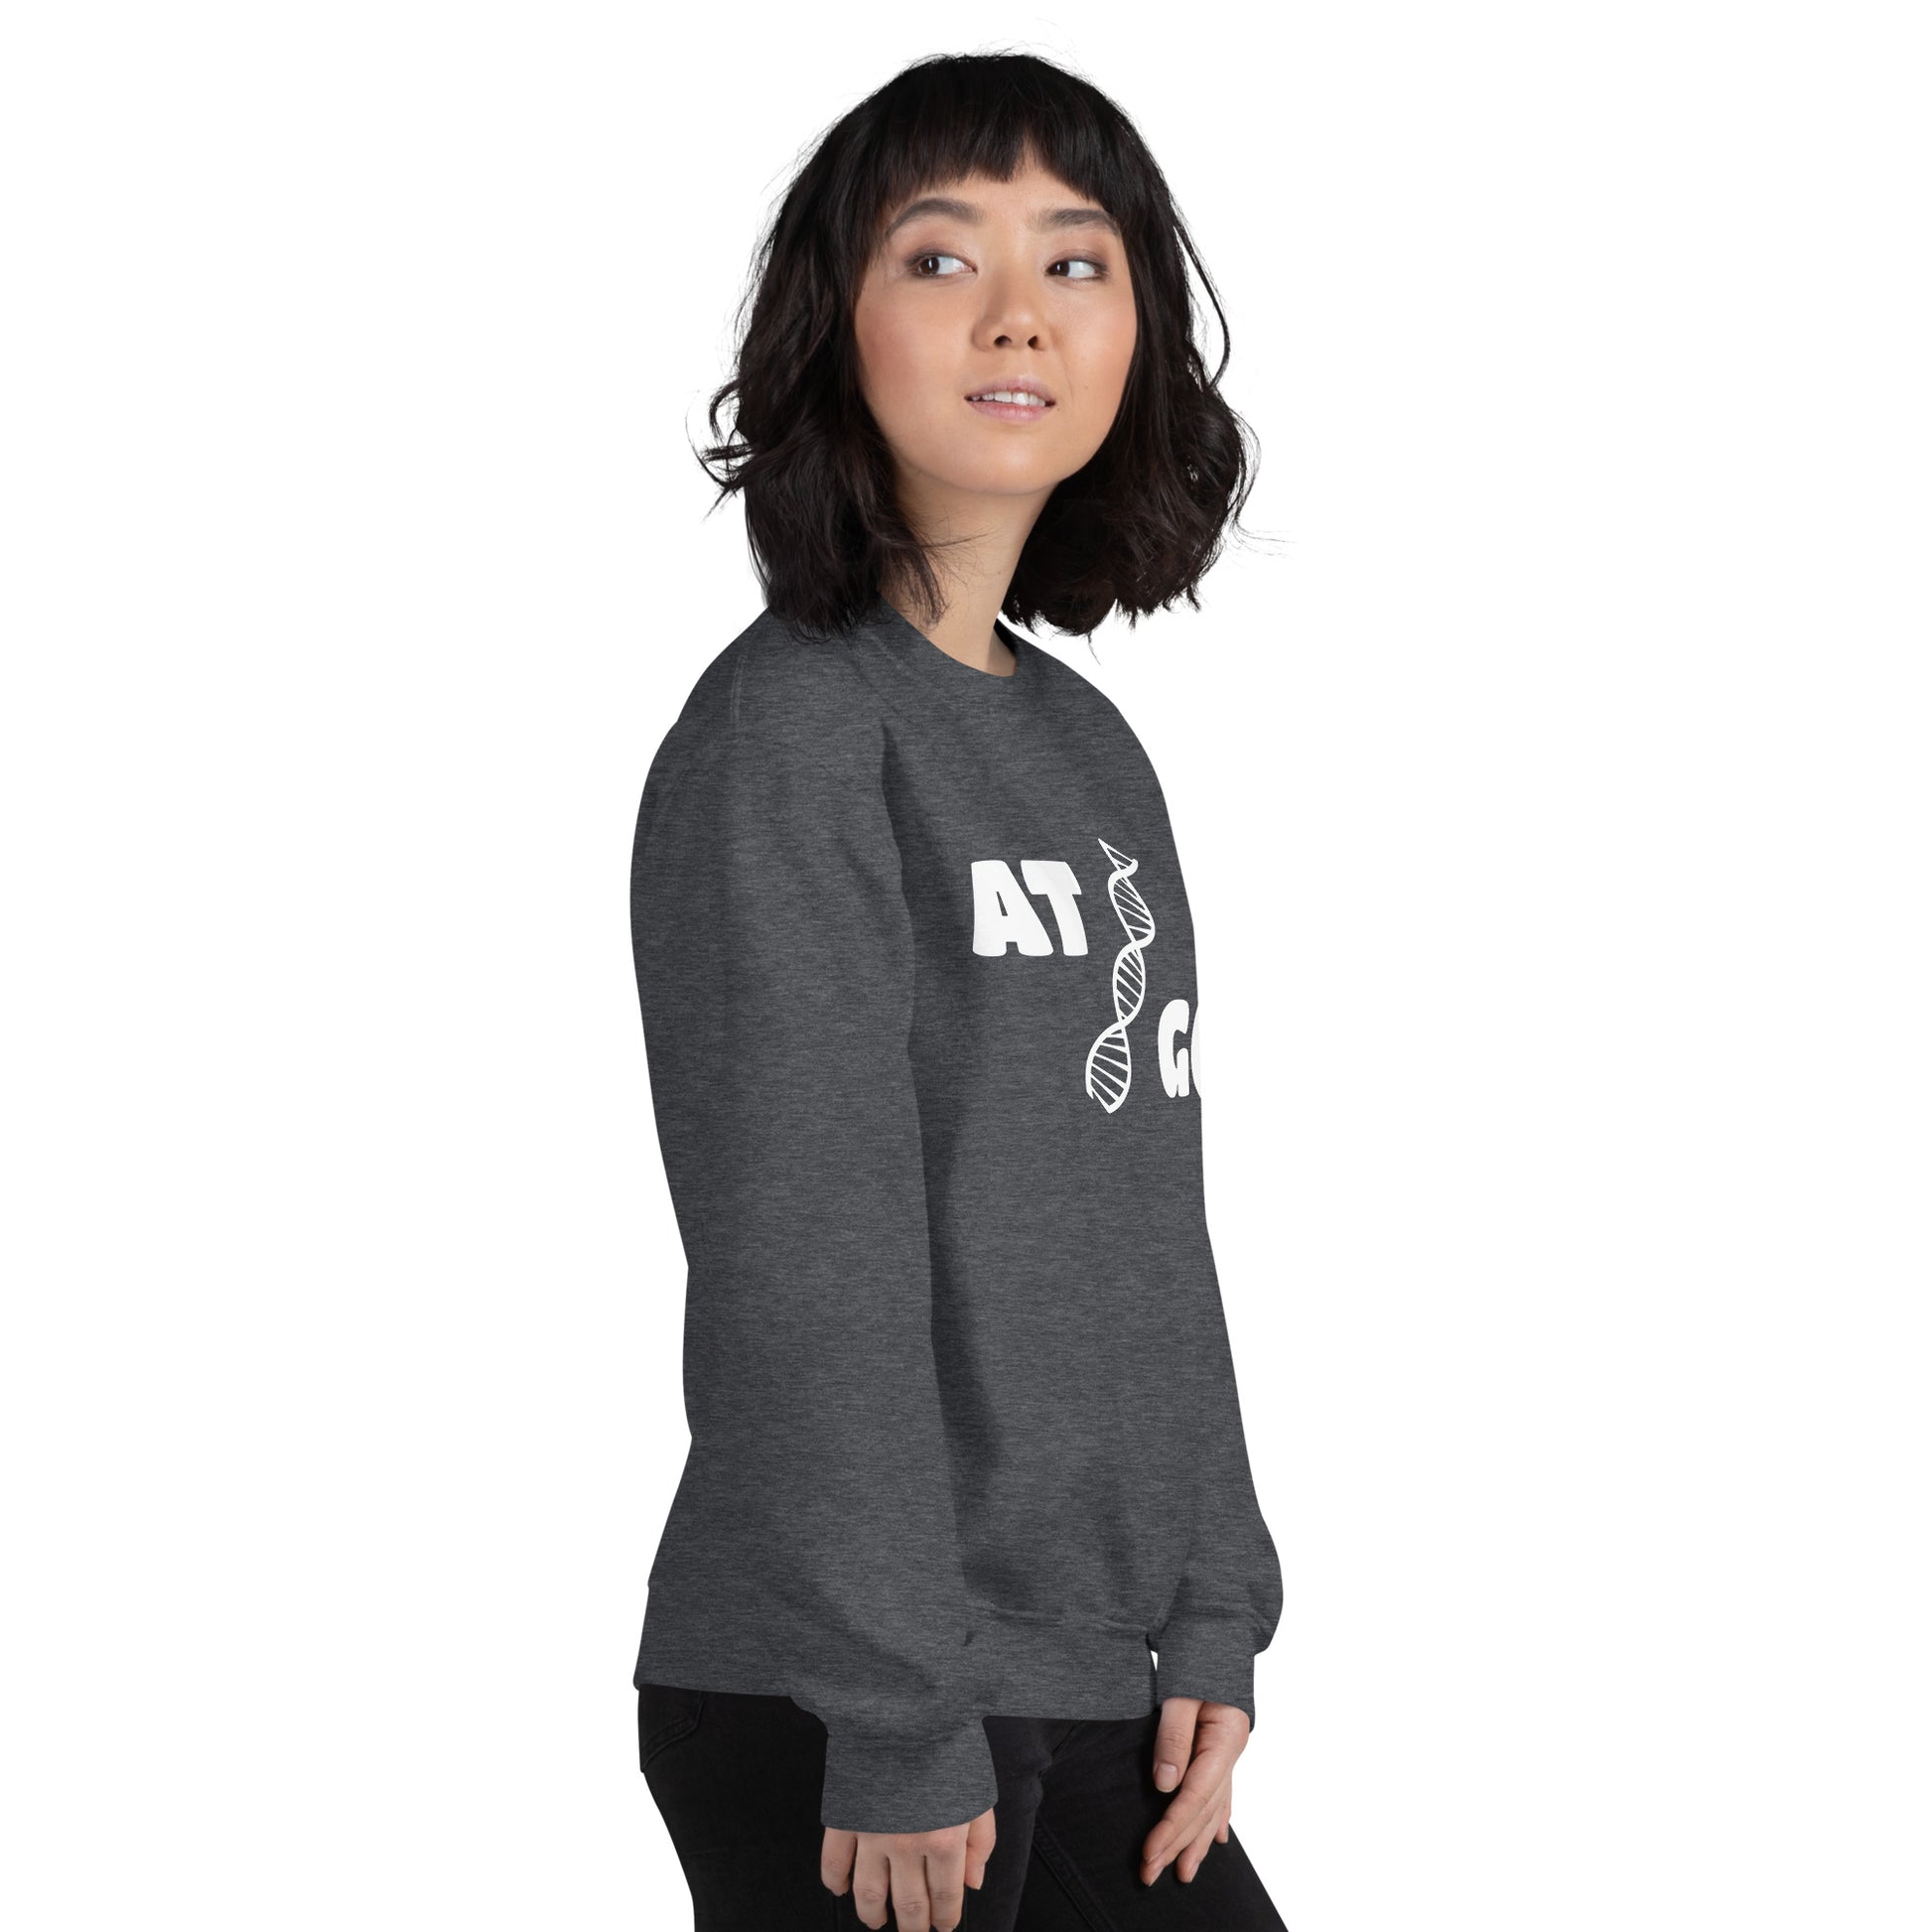 Women with dark grey sweatshirt with image of a DNA string and the text "ATGC"